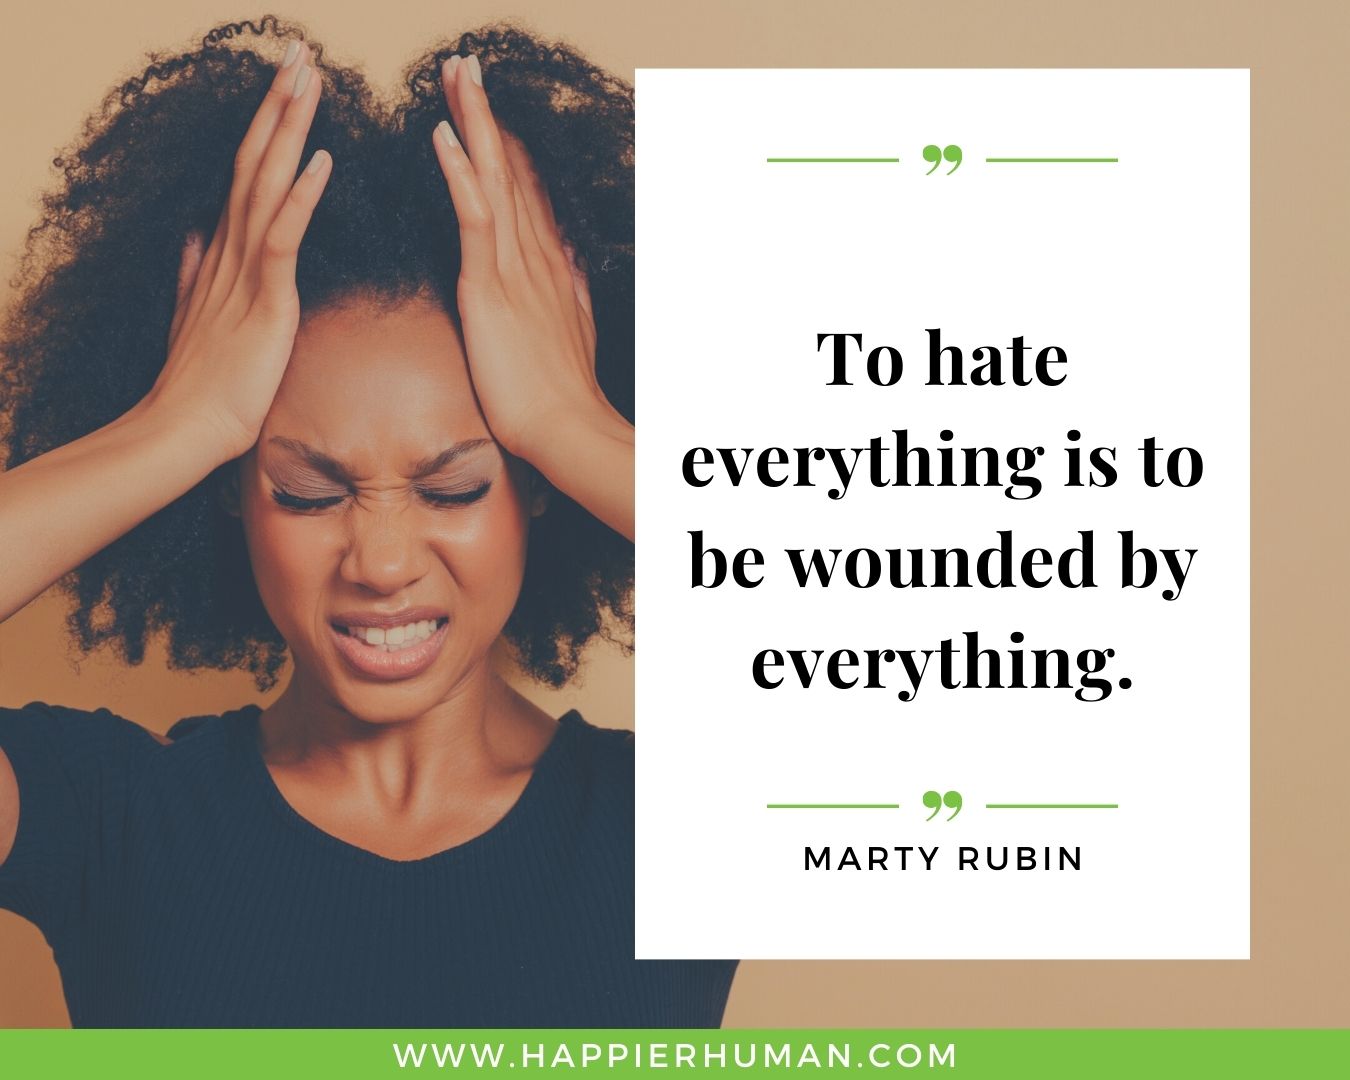 Haters Quotes - "To hate everything is to be wounded by everything." - Marty Rubin